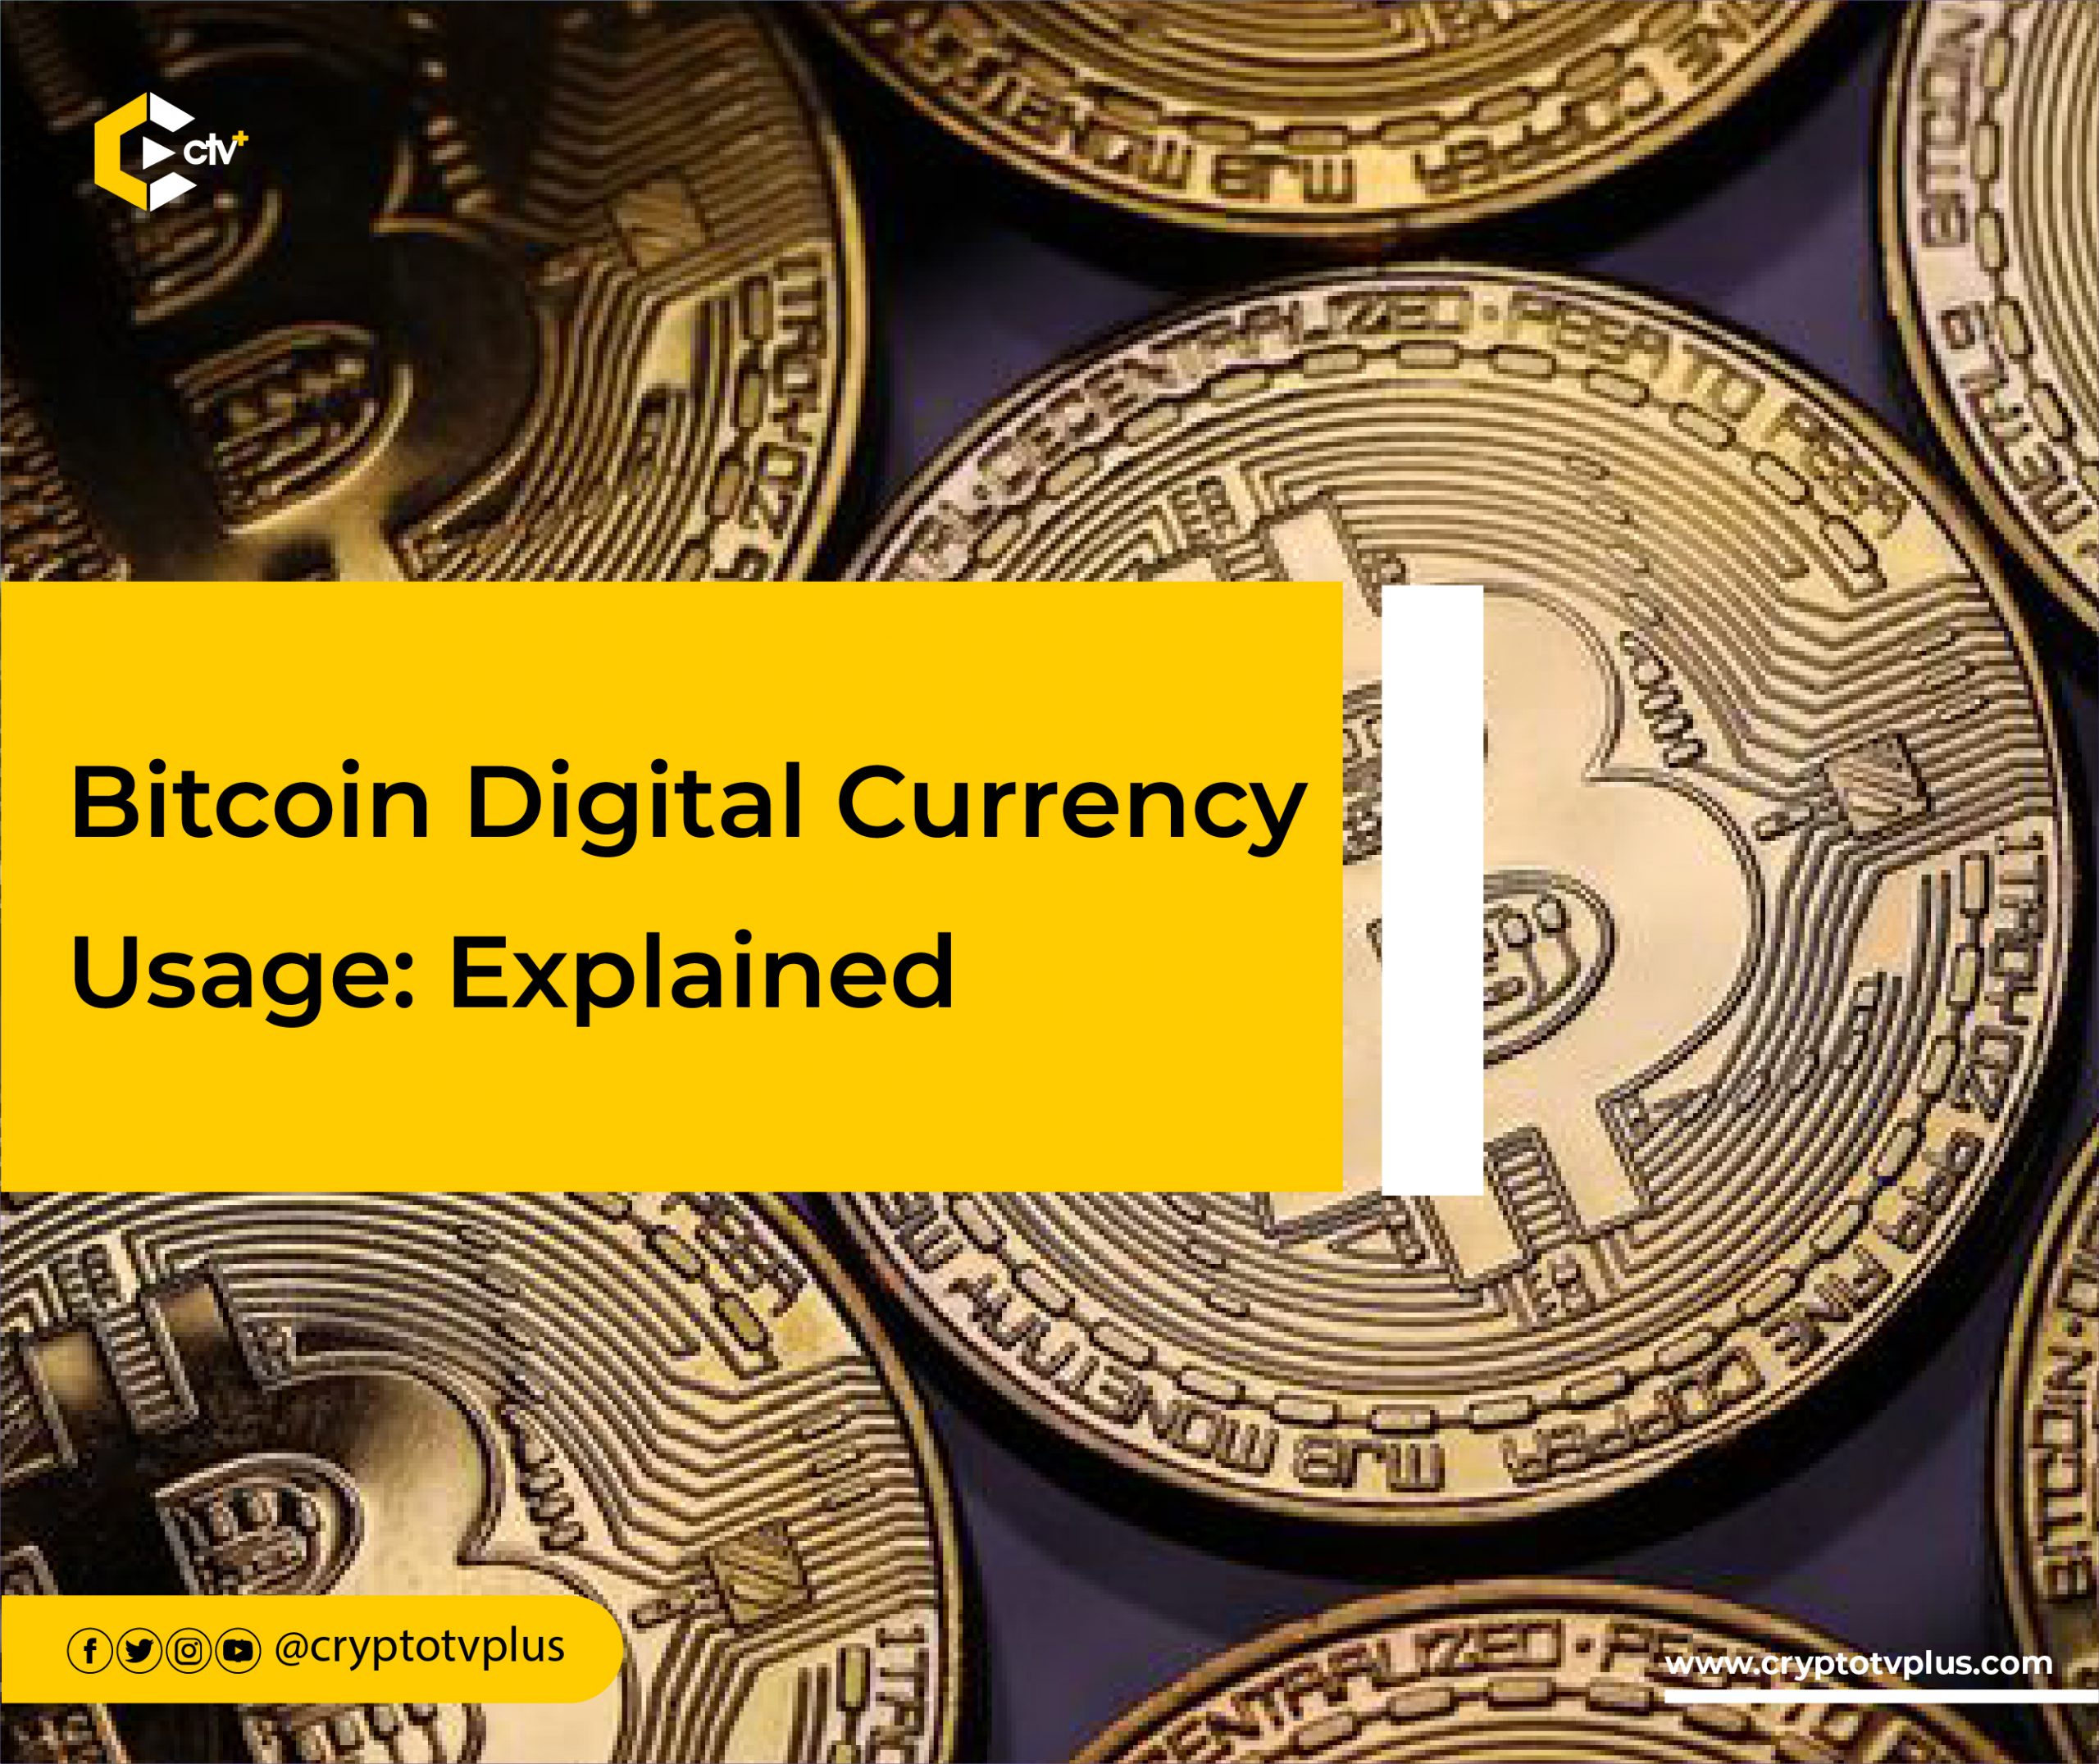 Bitcoin Digital Currency Usage: Explained